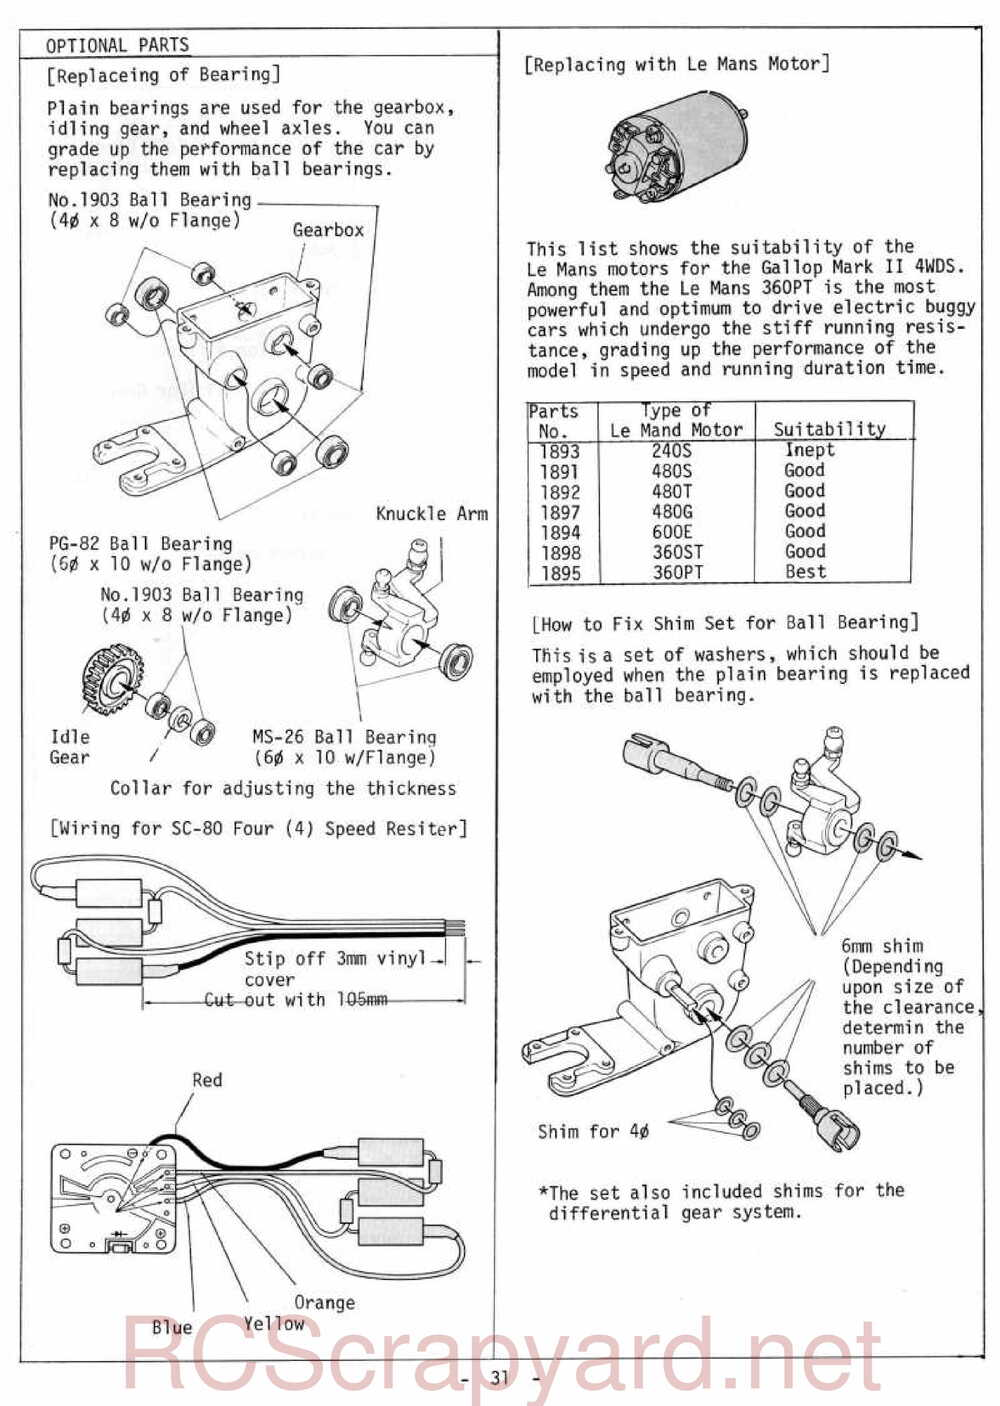 Kyosho - 3069 - Gallop MkII - Manual - Page 31